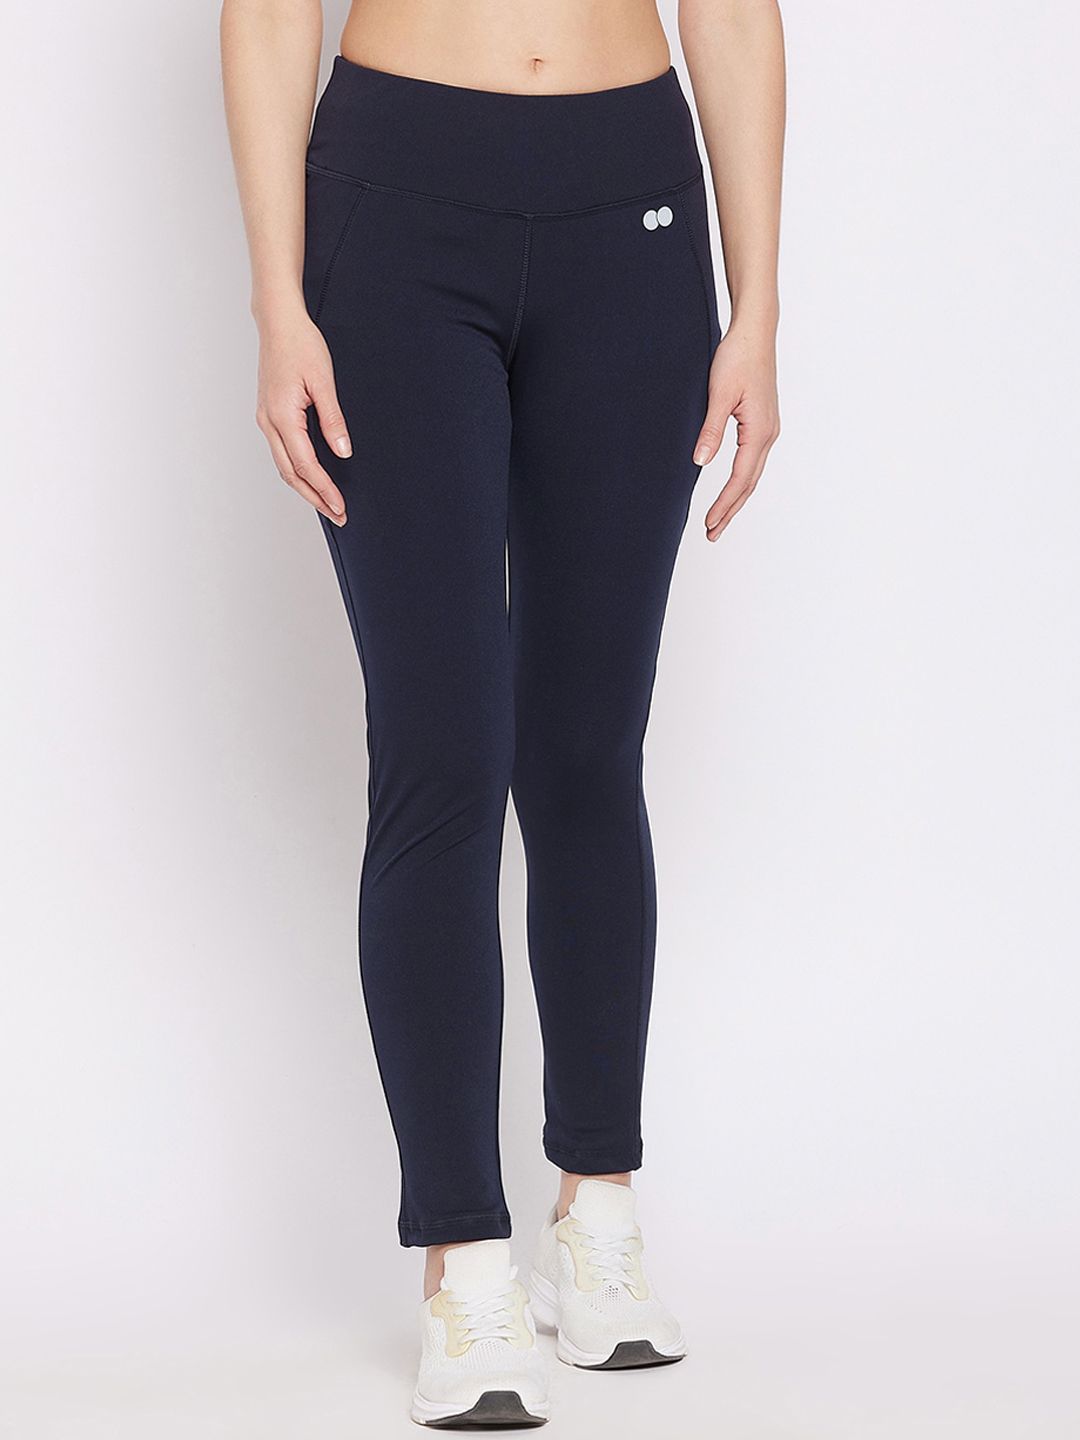 Clovia Women Navy Blue Solid Snug-Fit Activewear Tights Price in India